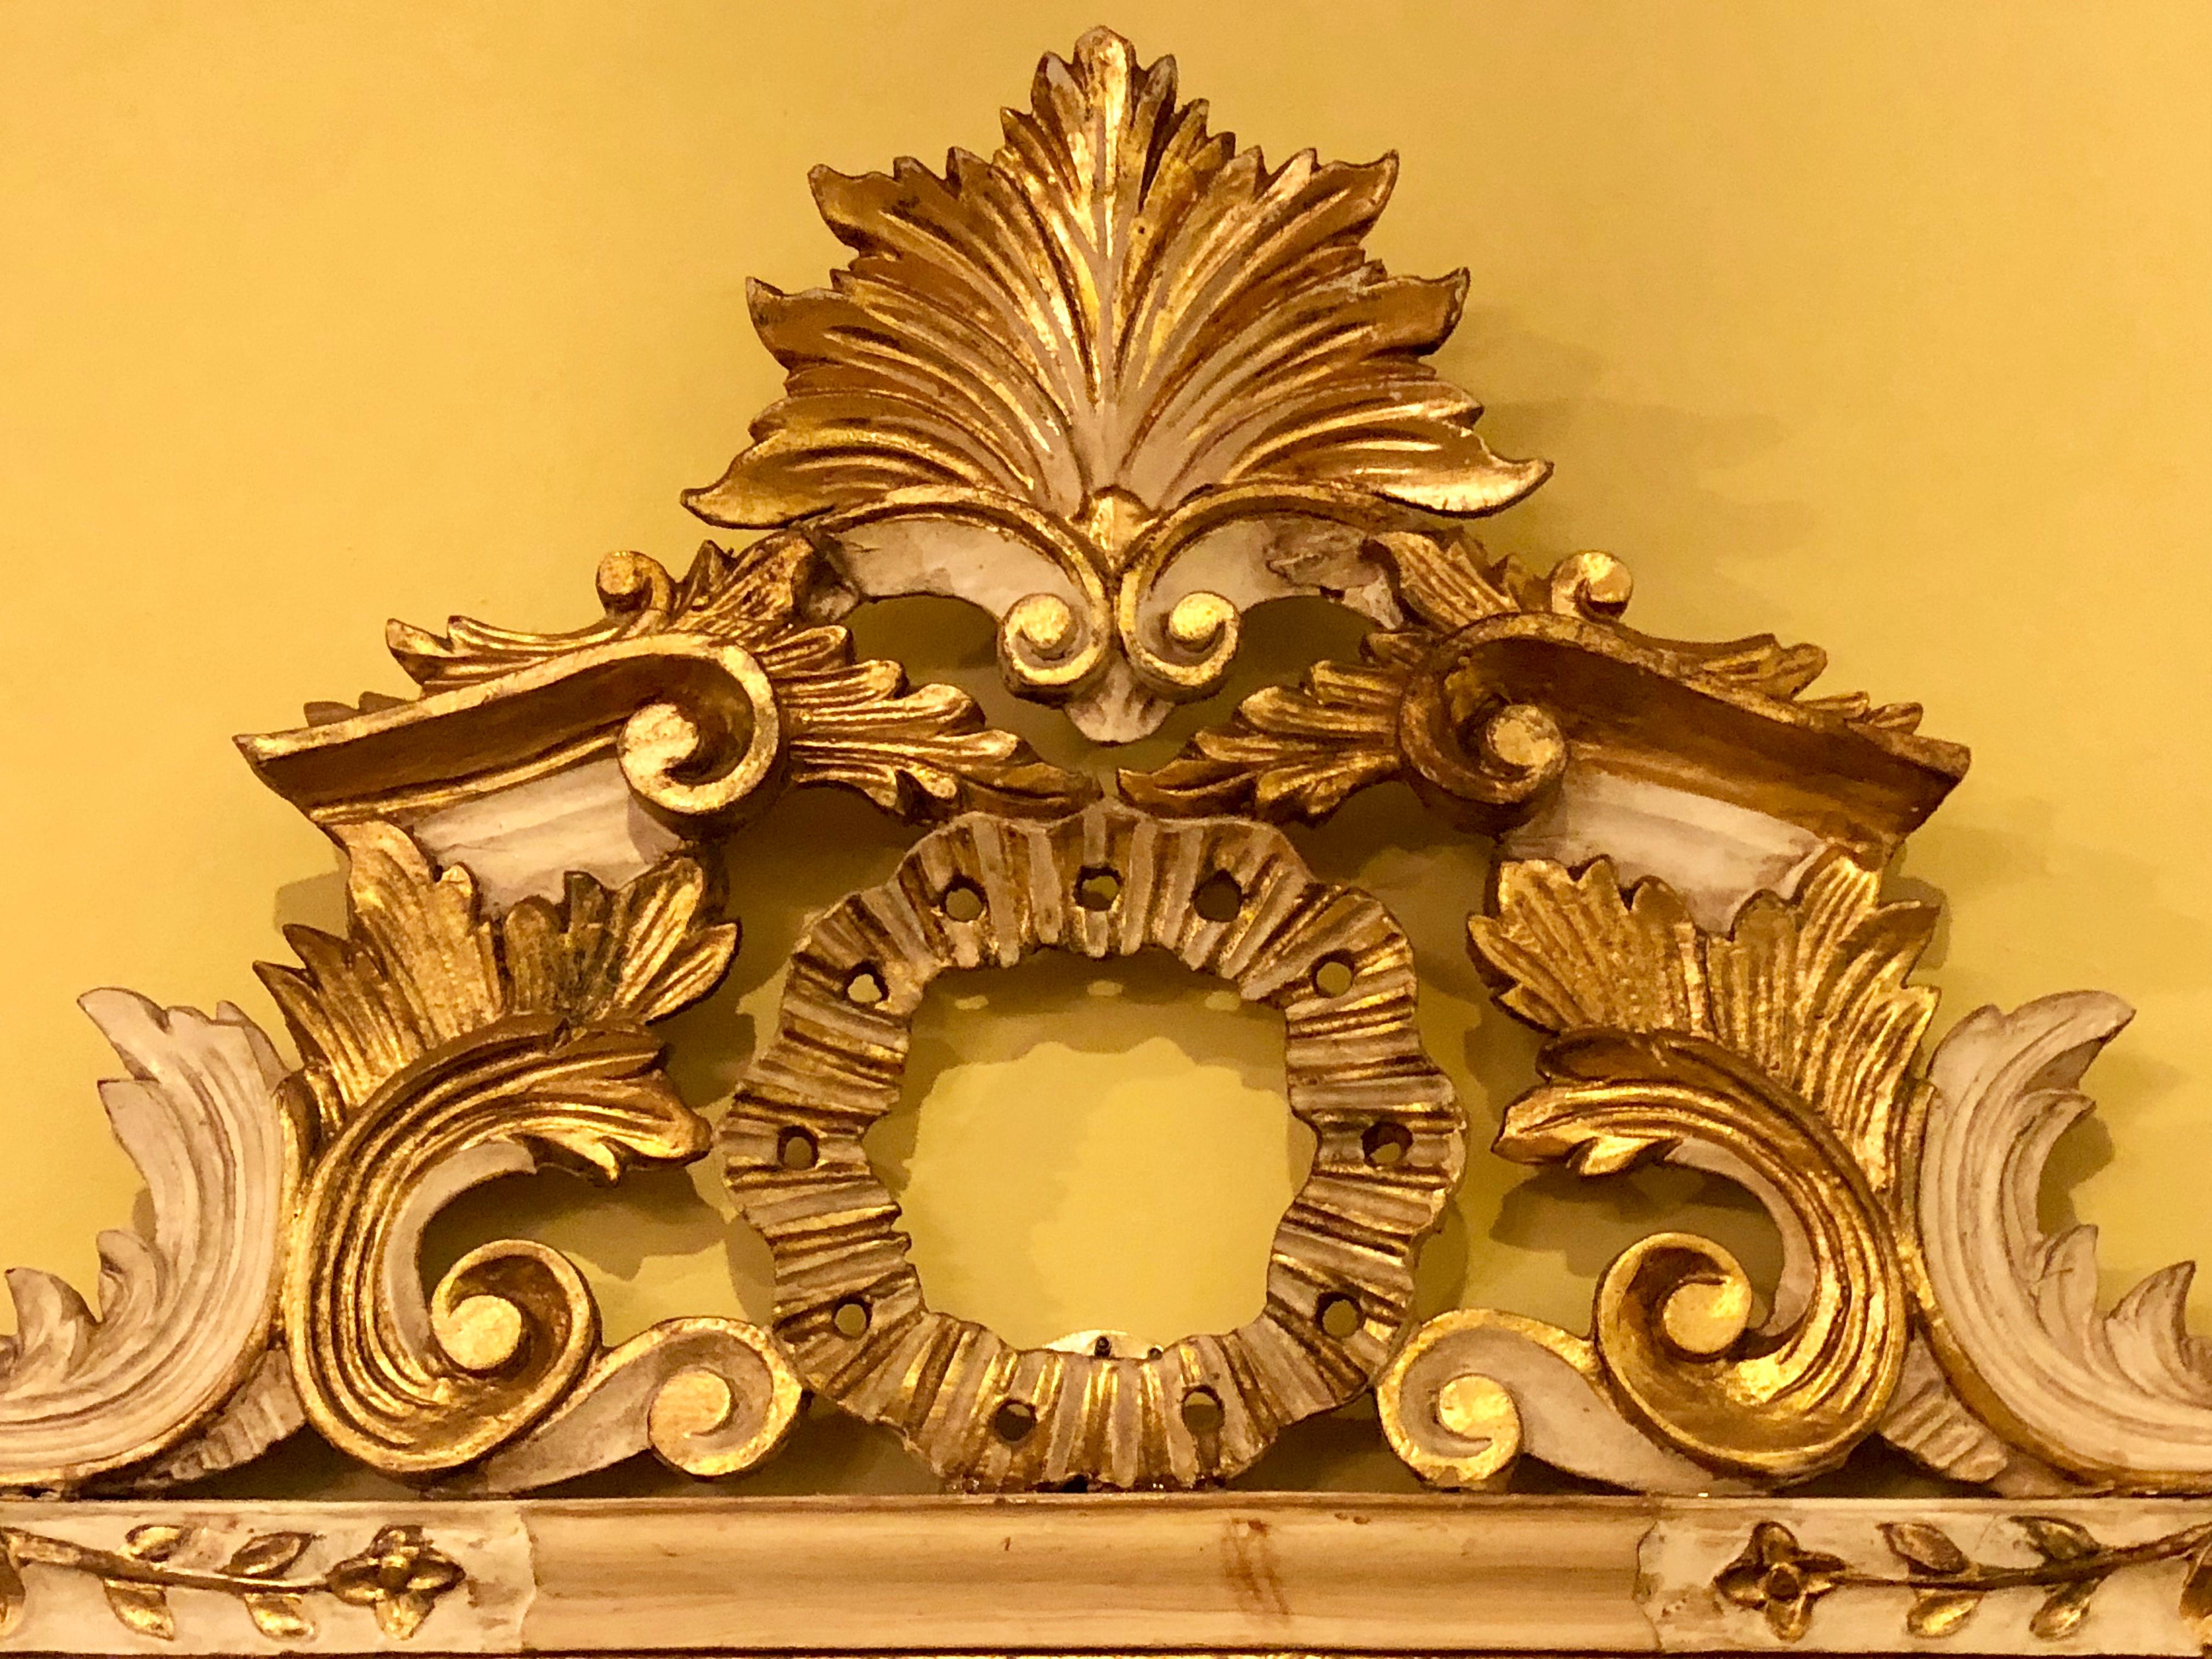 Pair of parcel-gilt mirrors. Beautifully carved representing the ideal of the Rococo period which symbolizes delicacy and romantic style along with feminine and light details. Italian Rococo style is represented in its fullest with the features of